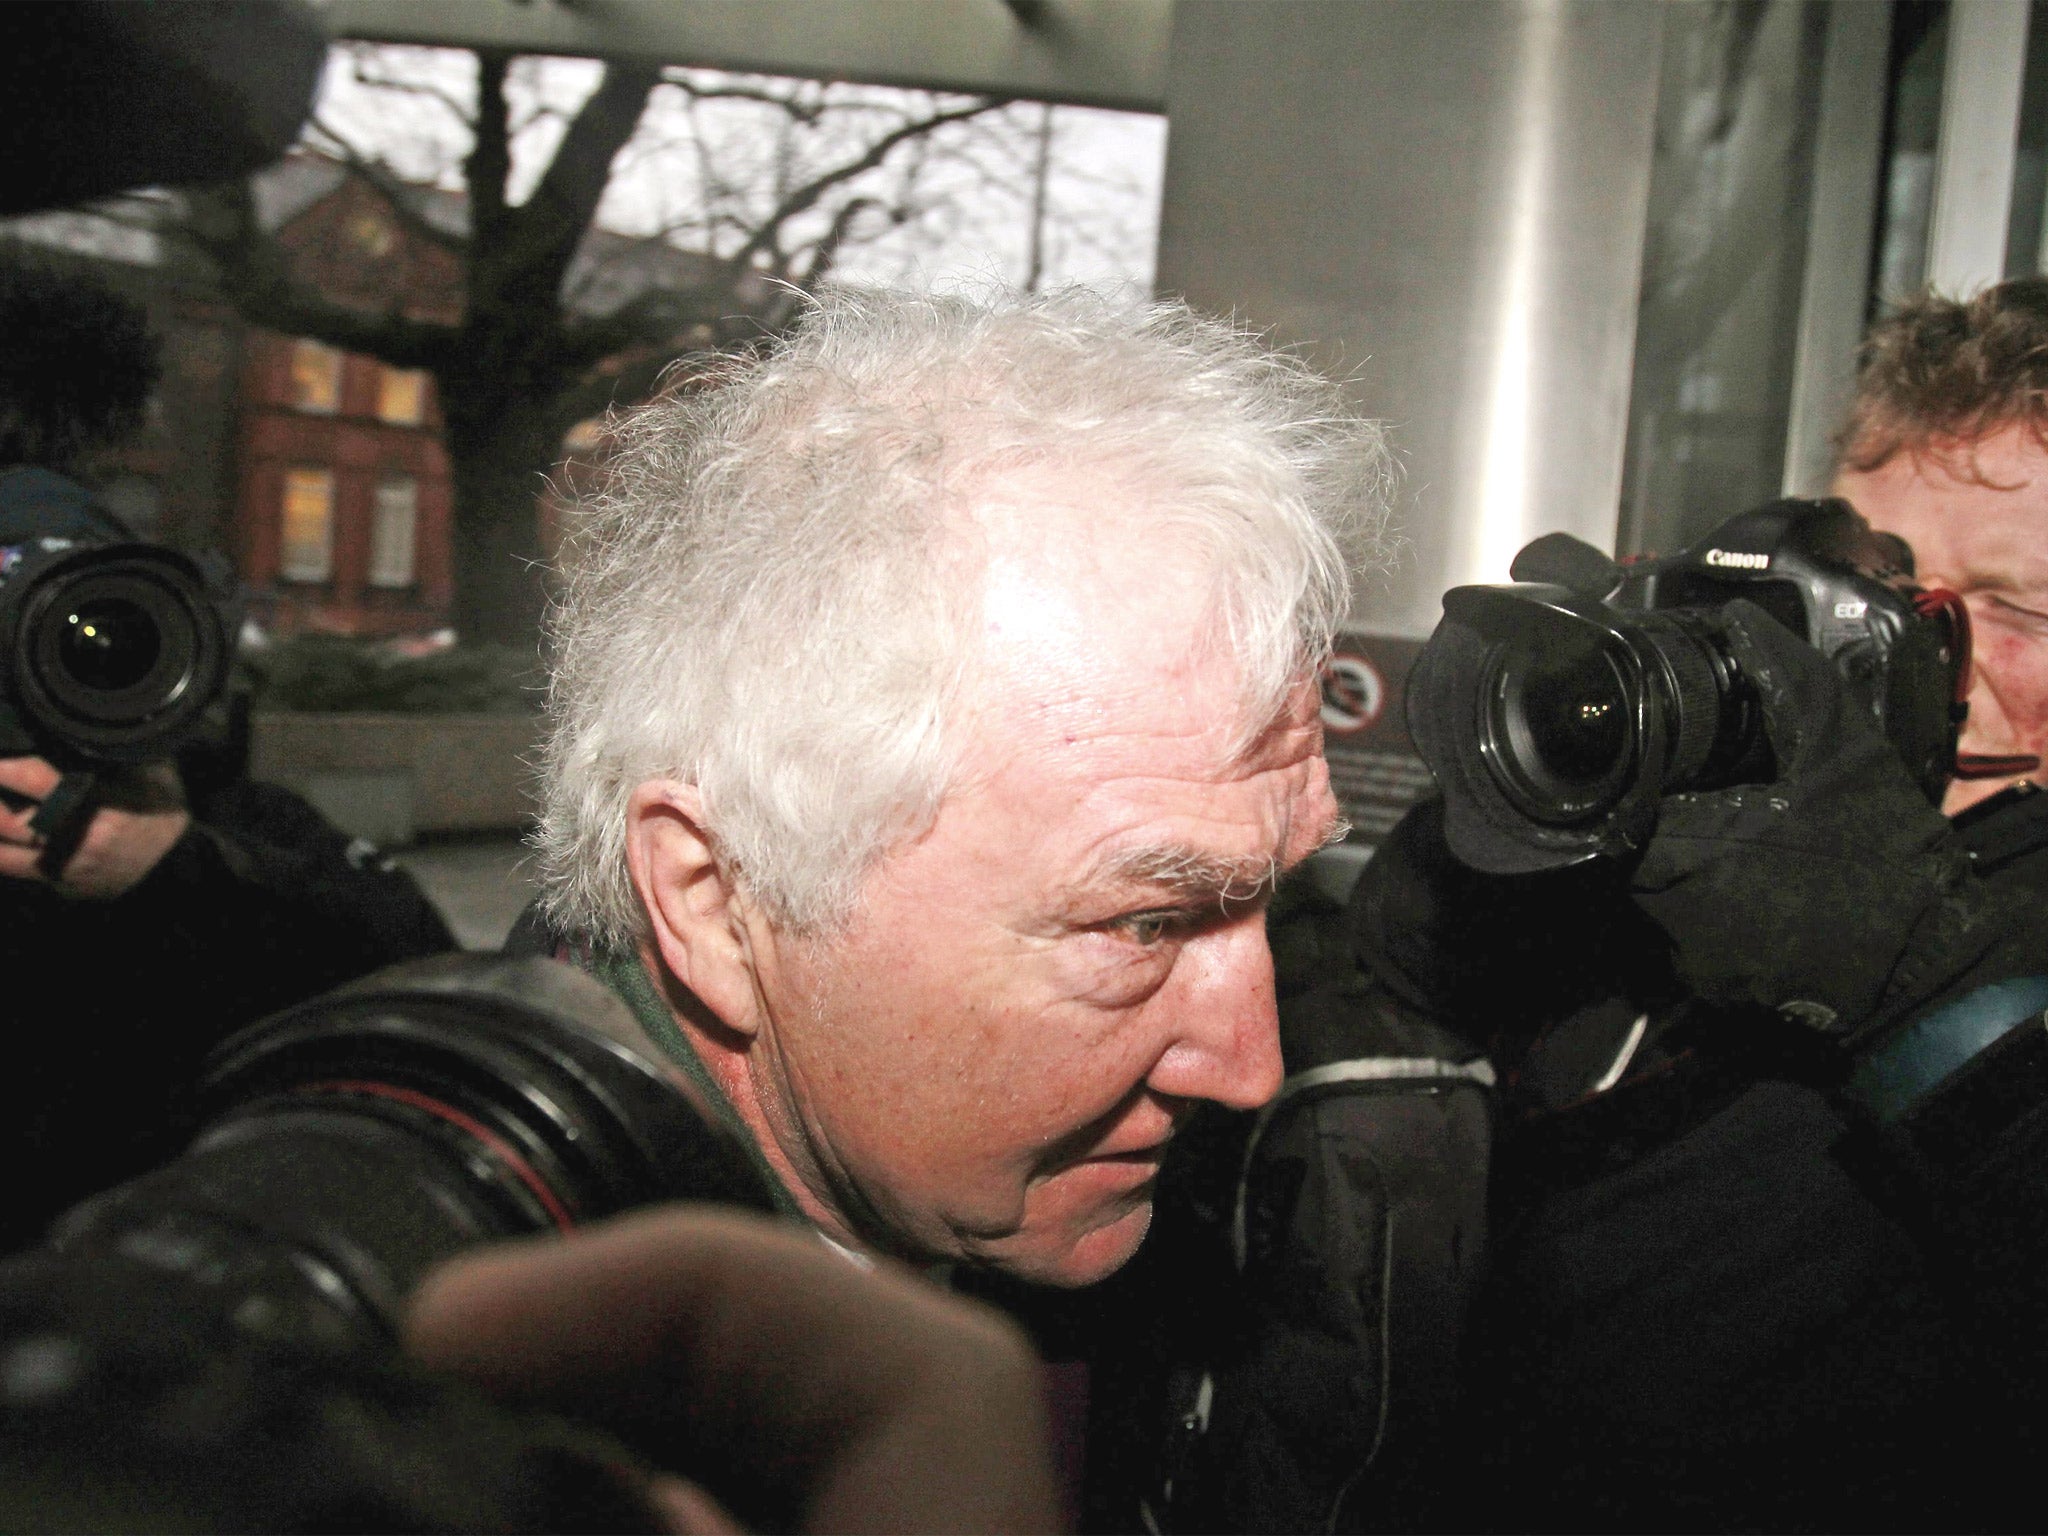 Sean FitzPatrick, former chairman of Anglo Irish, arriving at court in Dublin where he, along with two others, faces charges of trying to inflate the share price of the now-defunct bank